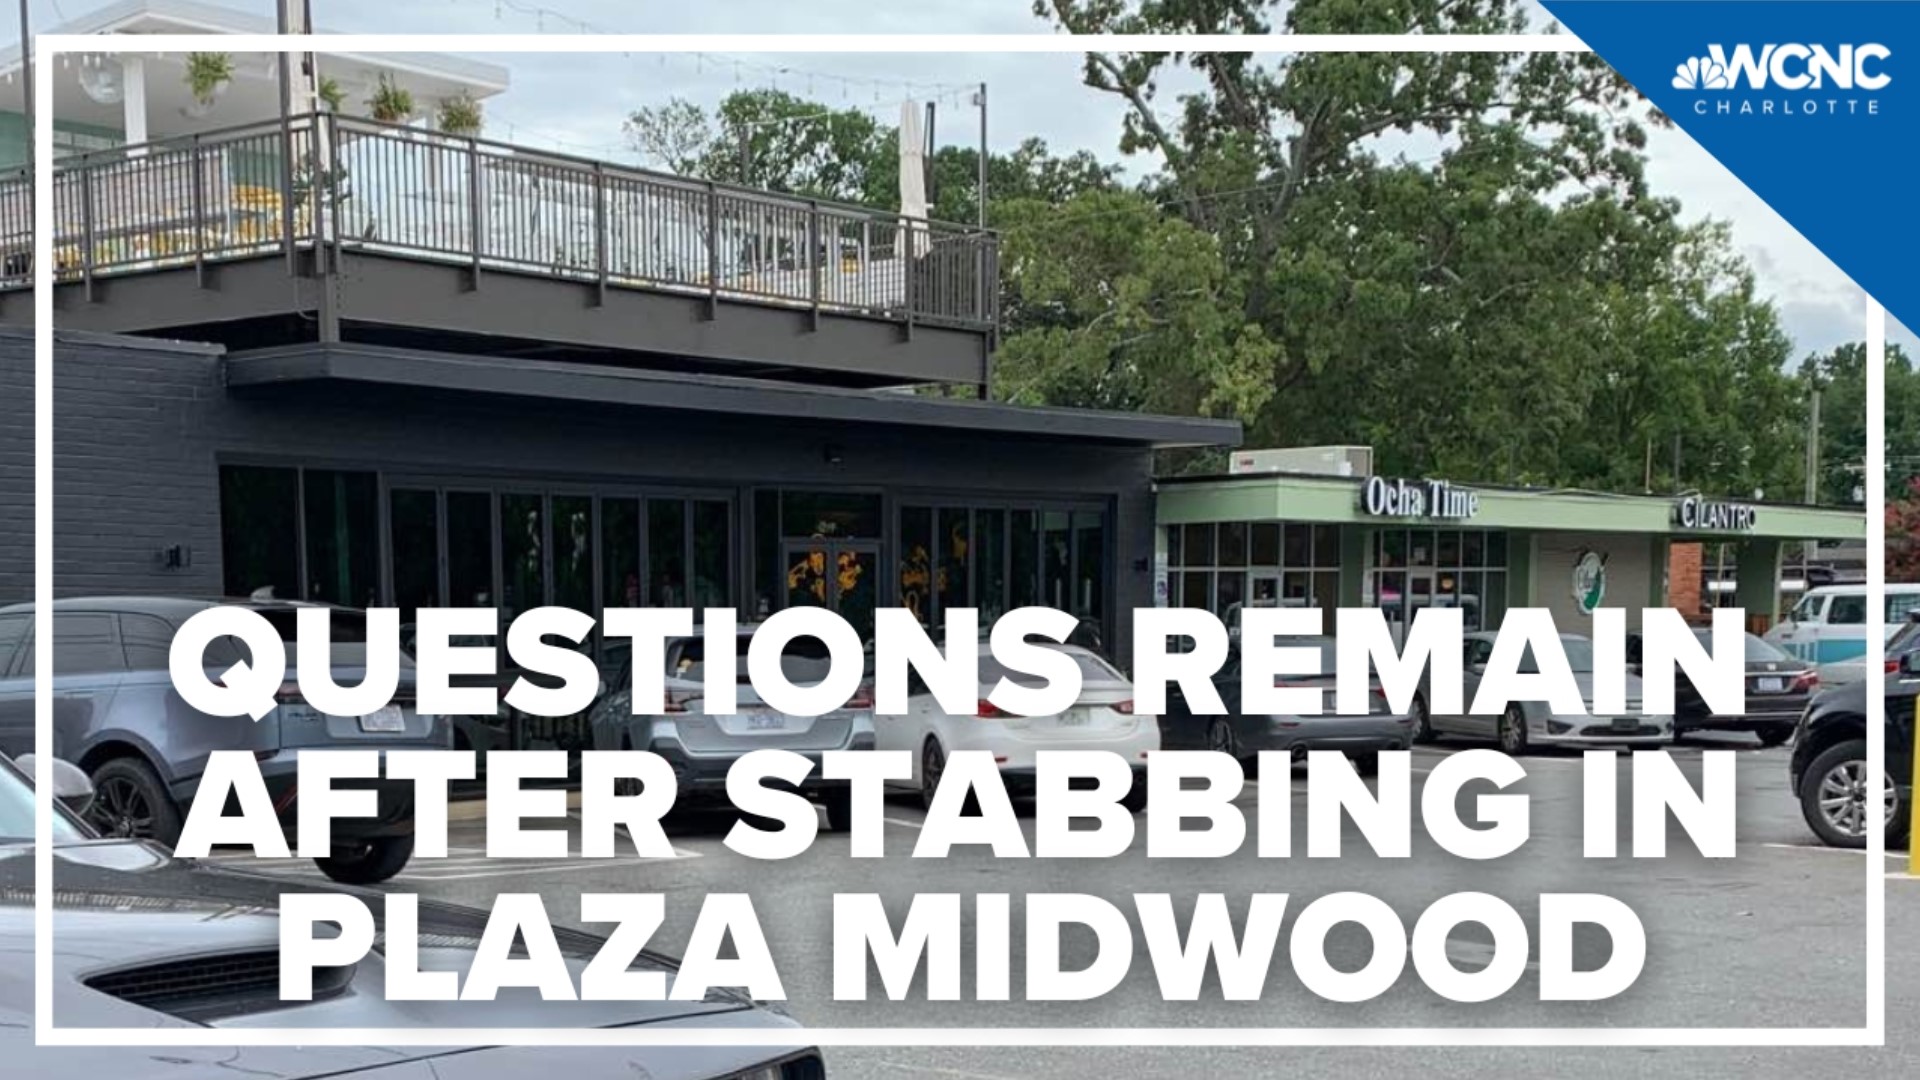 The Plaza Midwood community is searching for answers.